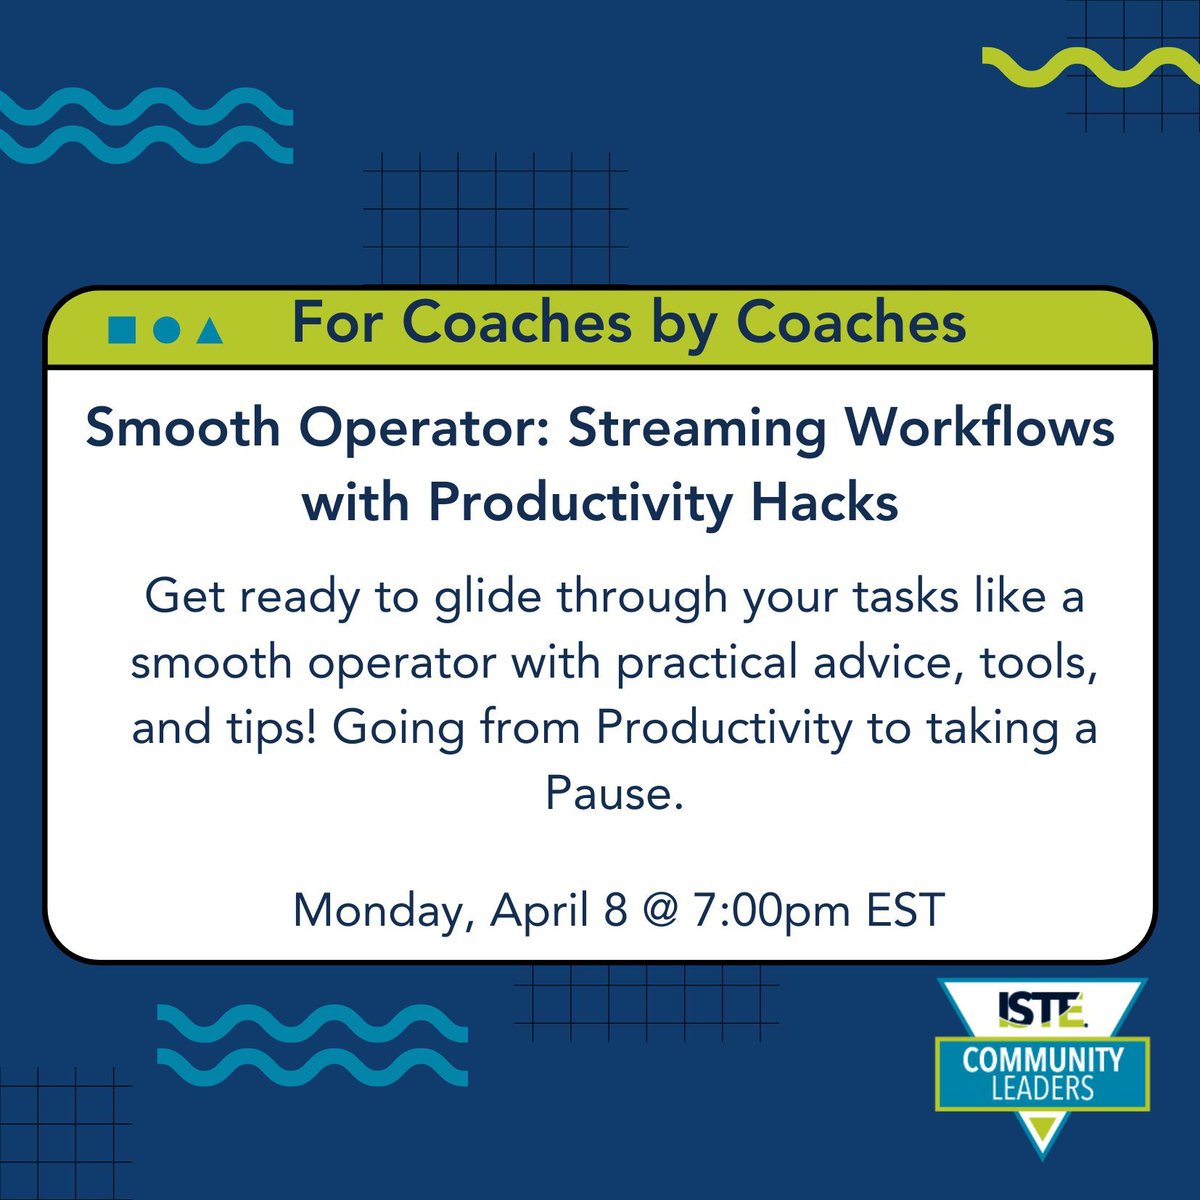 Join @ISTECommunity Leaders for the #Coaches meetup on Monday, April 8 at 7pm EST to productivity tips and how to be a smooth operator with @Rosalyn_Teach & @PFerris_Coach! Register here: buff.ly/3J0fY99 #ForCoachesByCoaches